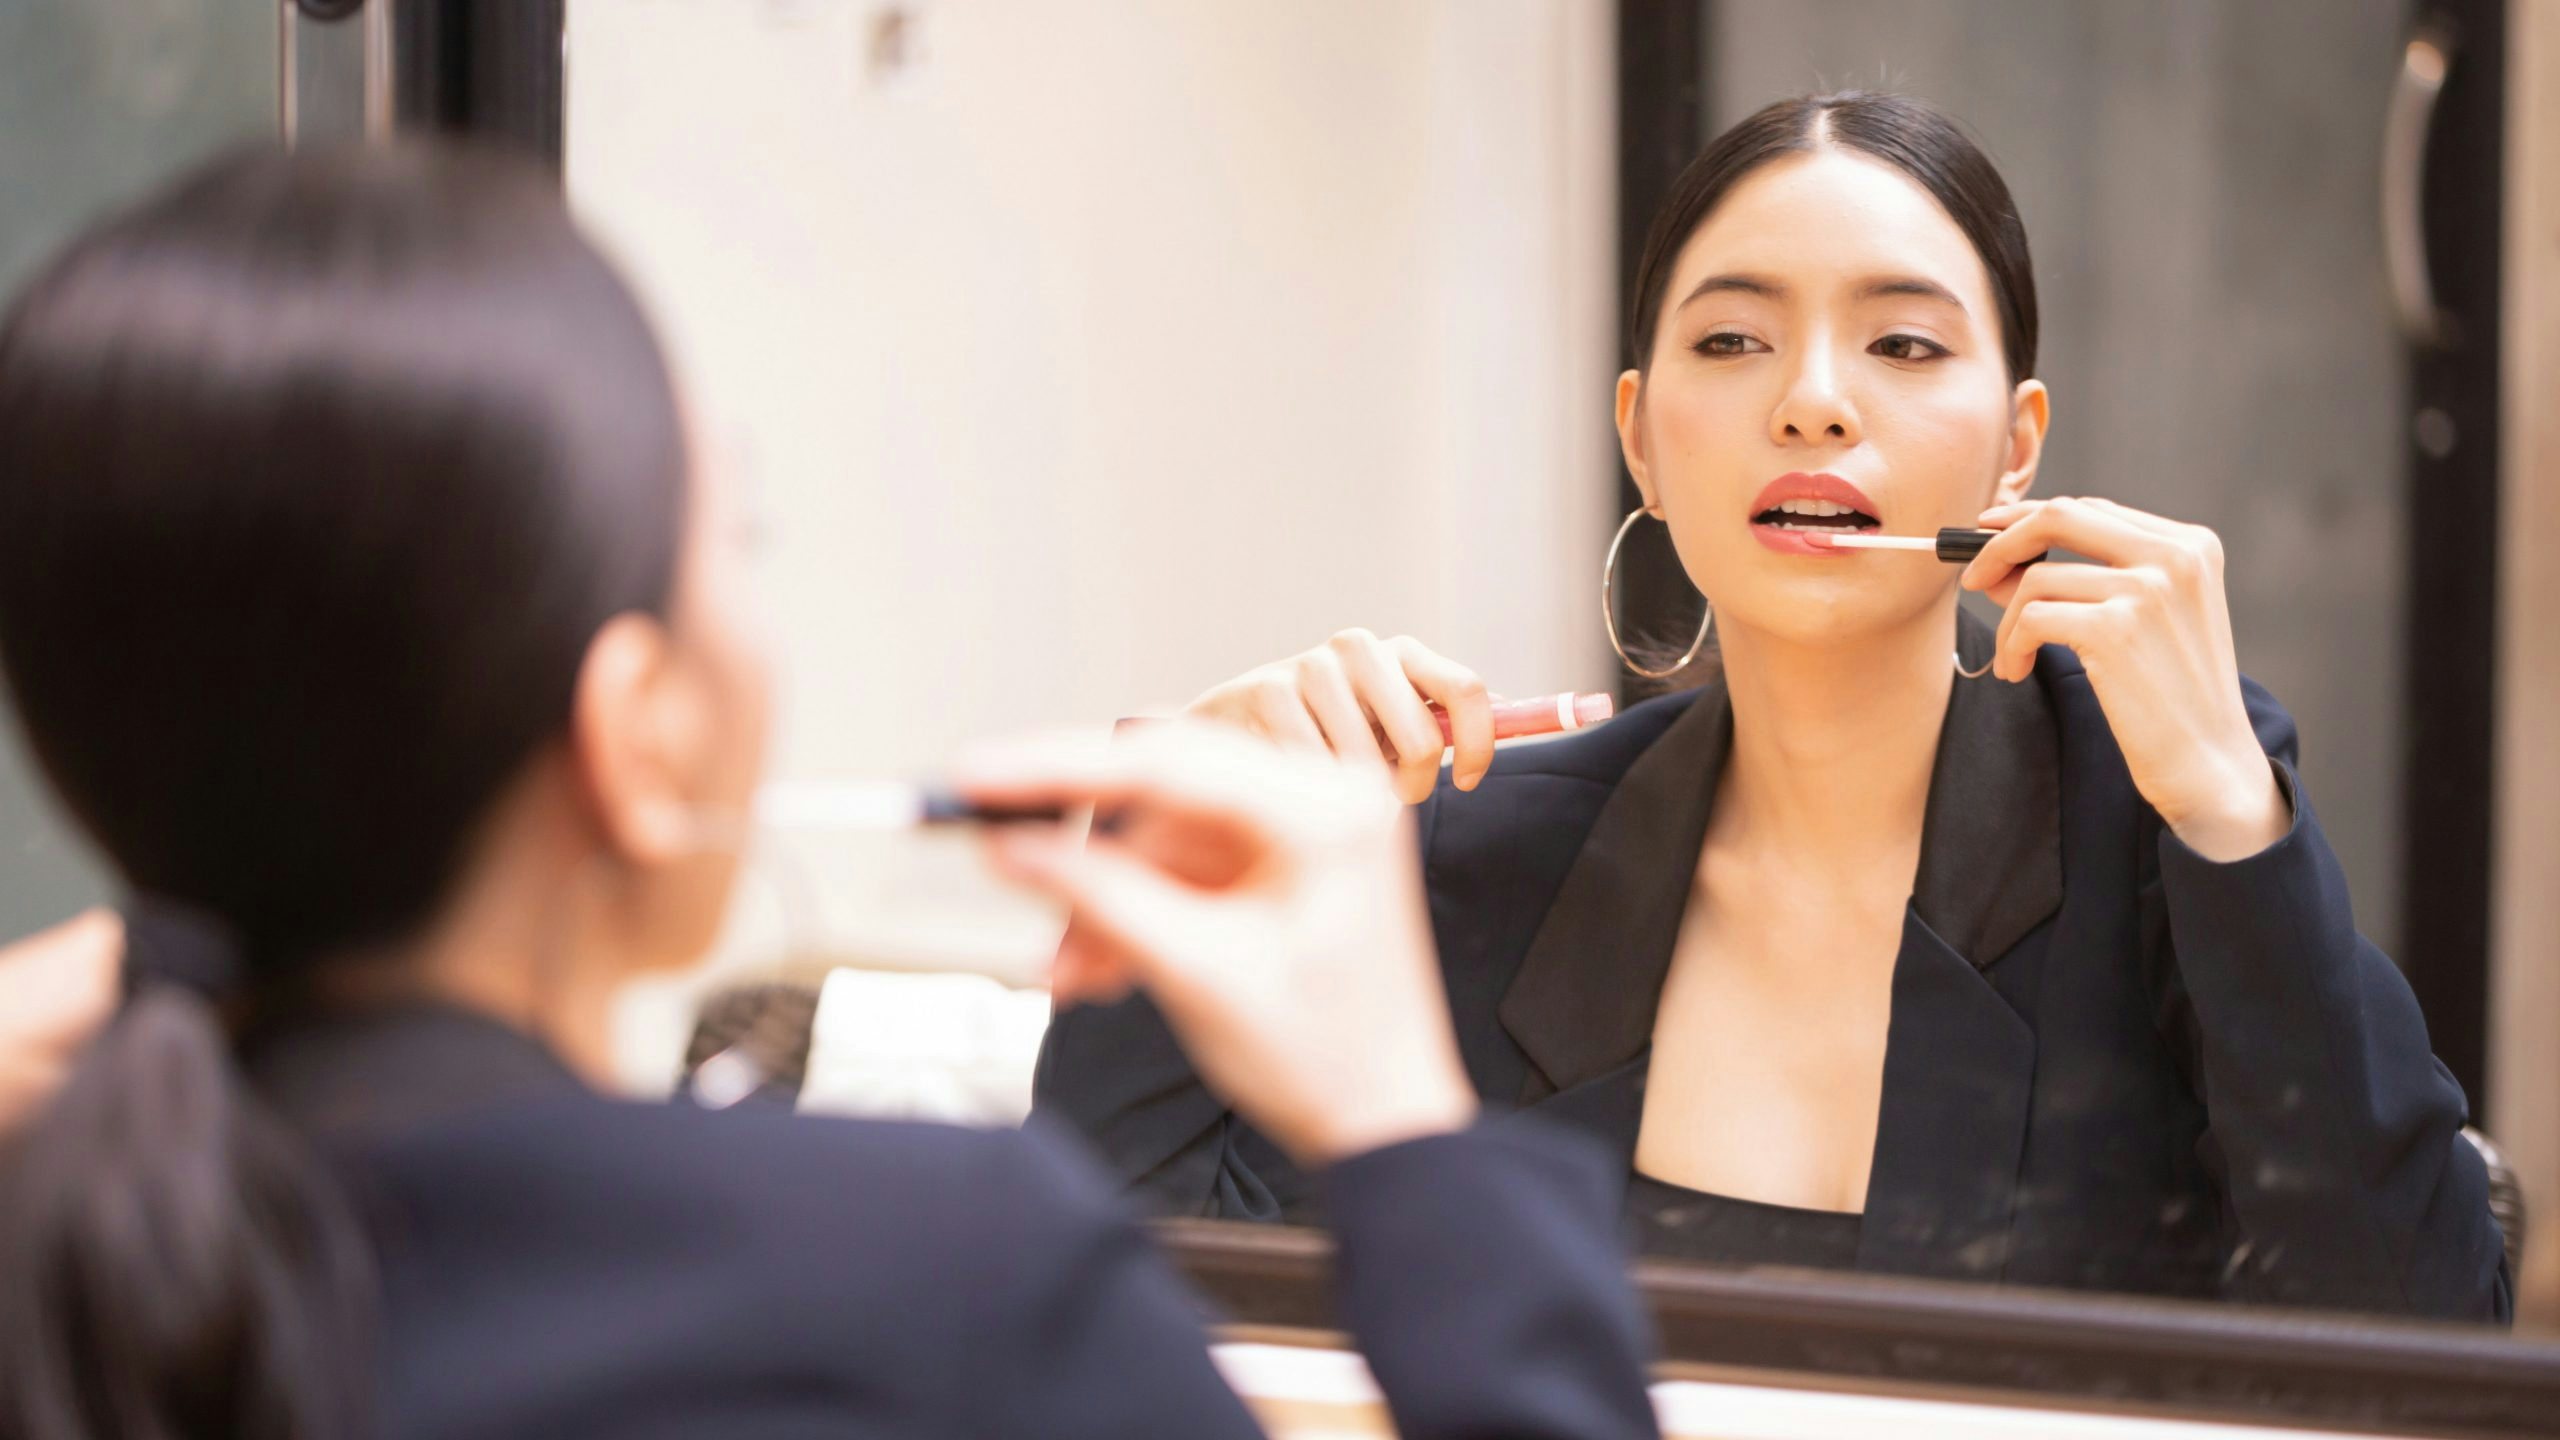 Beauty Duty, a word describing the expectation to dress up in public, is trending on Chinese social media as women highlight societal pressures. Photo: Shutterstock